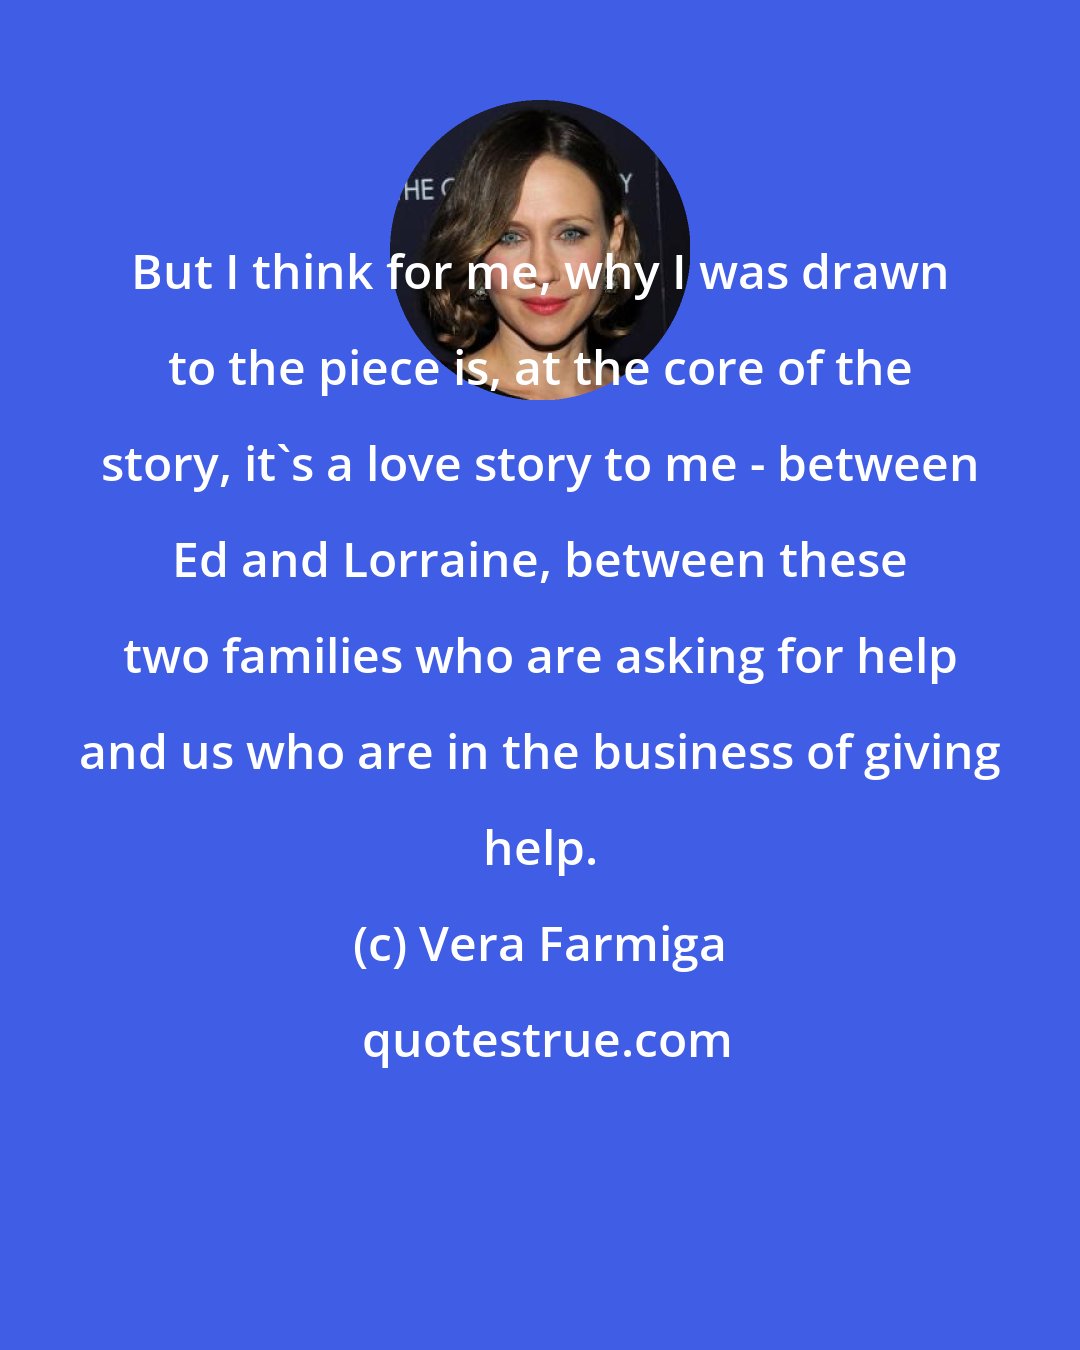 Vera Farmiga: But I think for me, why I was drawn to the piece is, at the core of the story, it's a love story to me - between Ed and Lorraine, between these two families who are asking for help and us who are in the business of giving help.